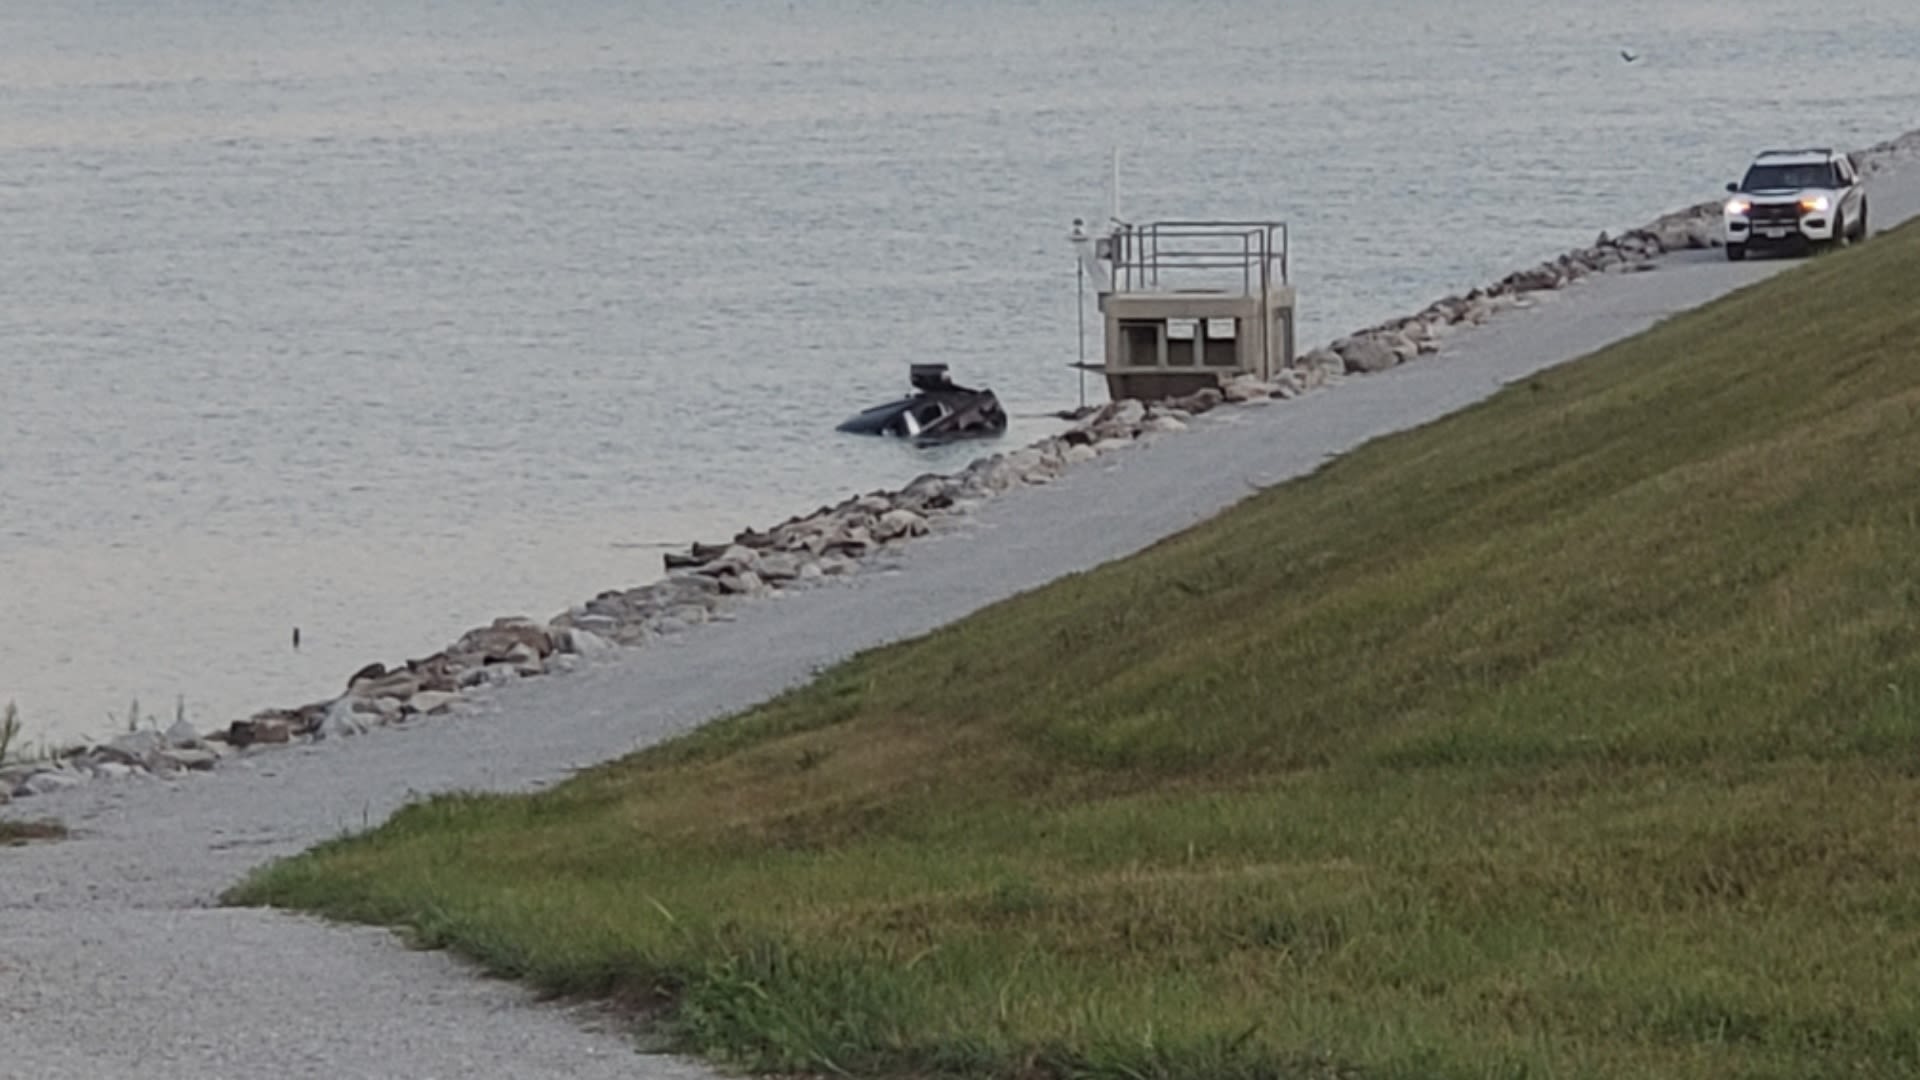 Empty vehicle found submerged in lake west of Lincoln